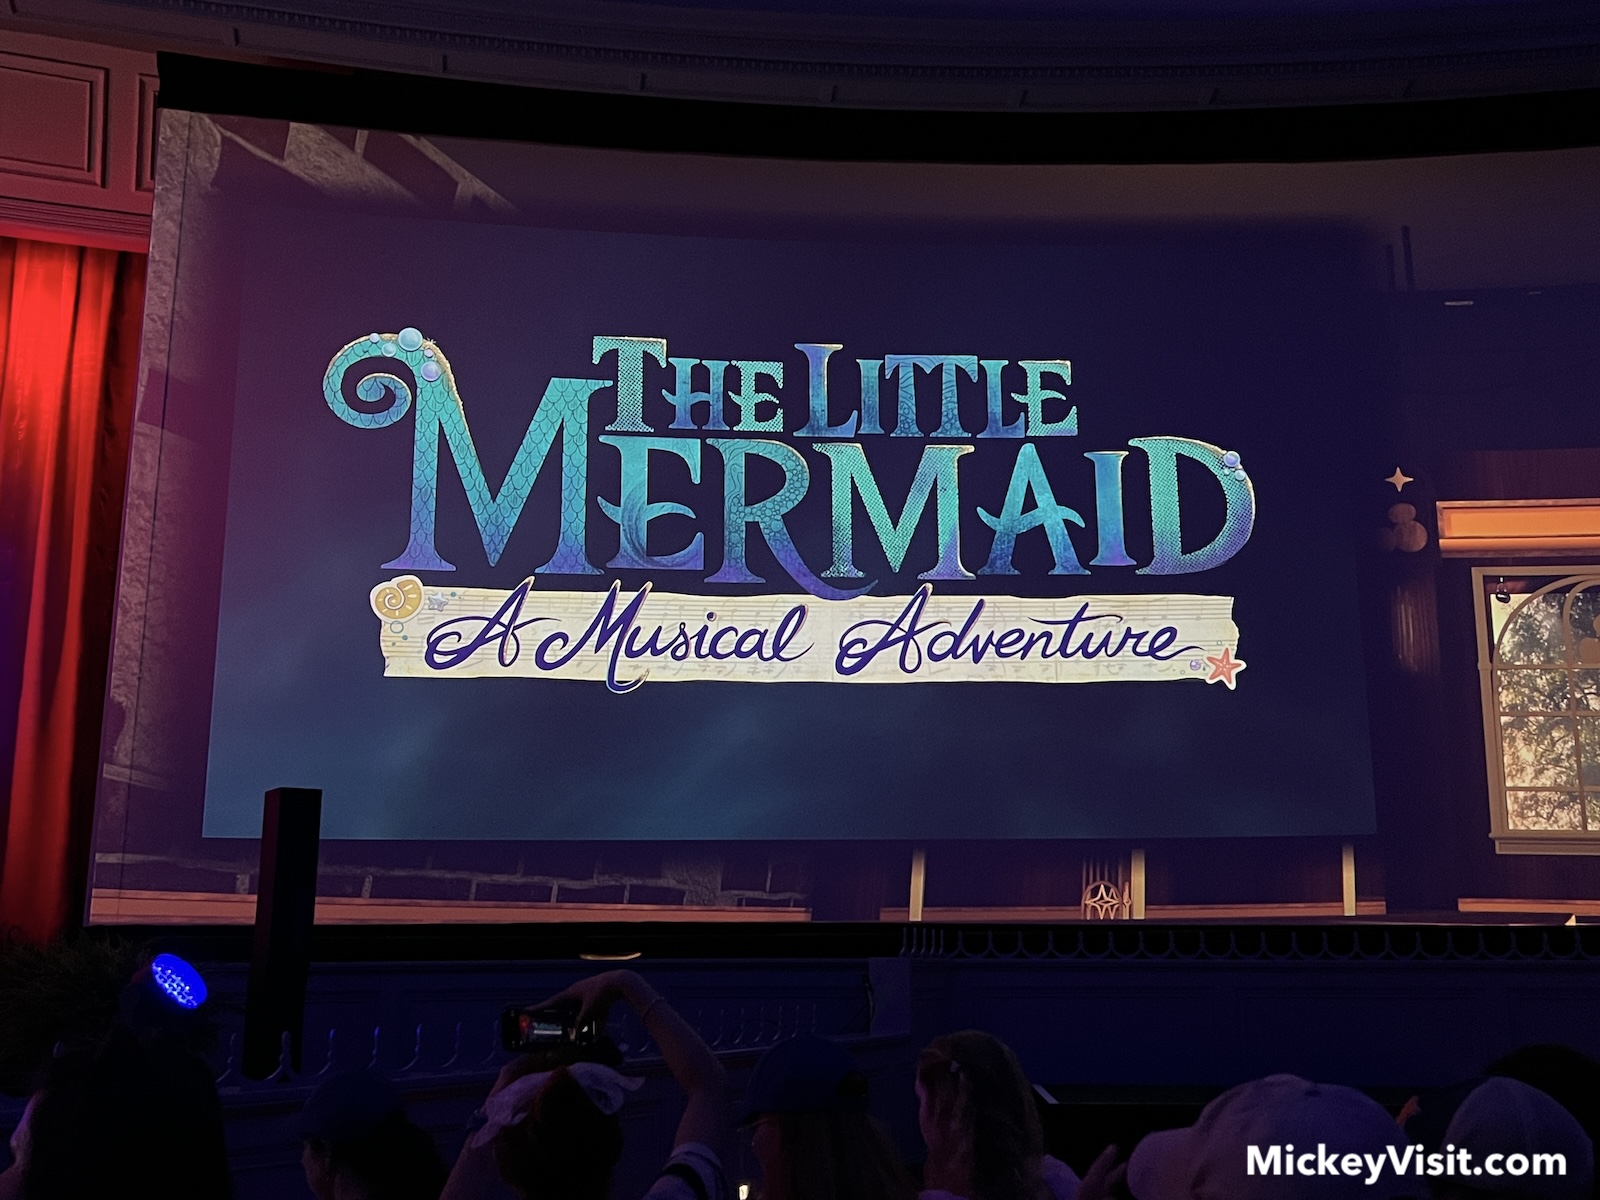 The Little Mermaid Hollywood Studios show title